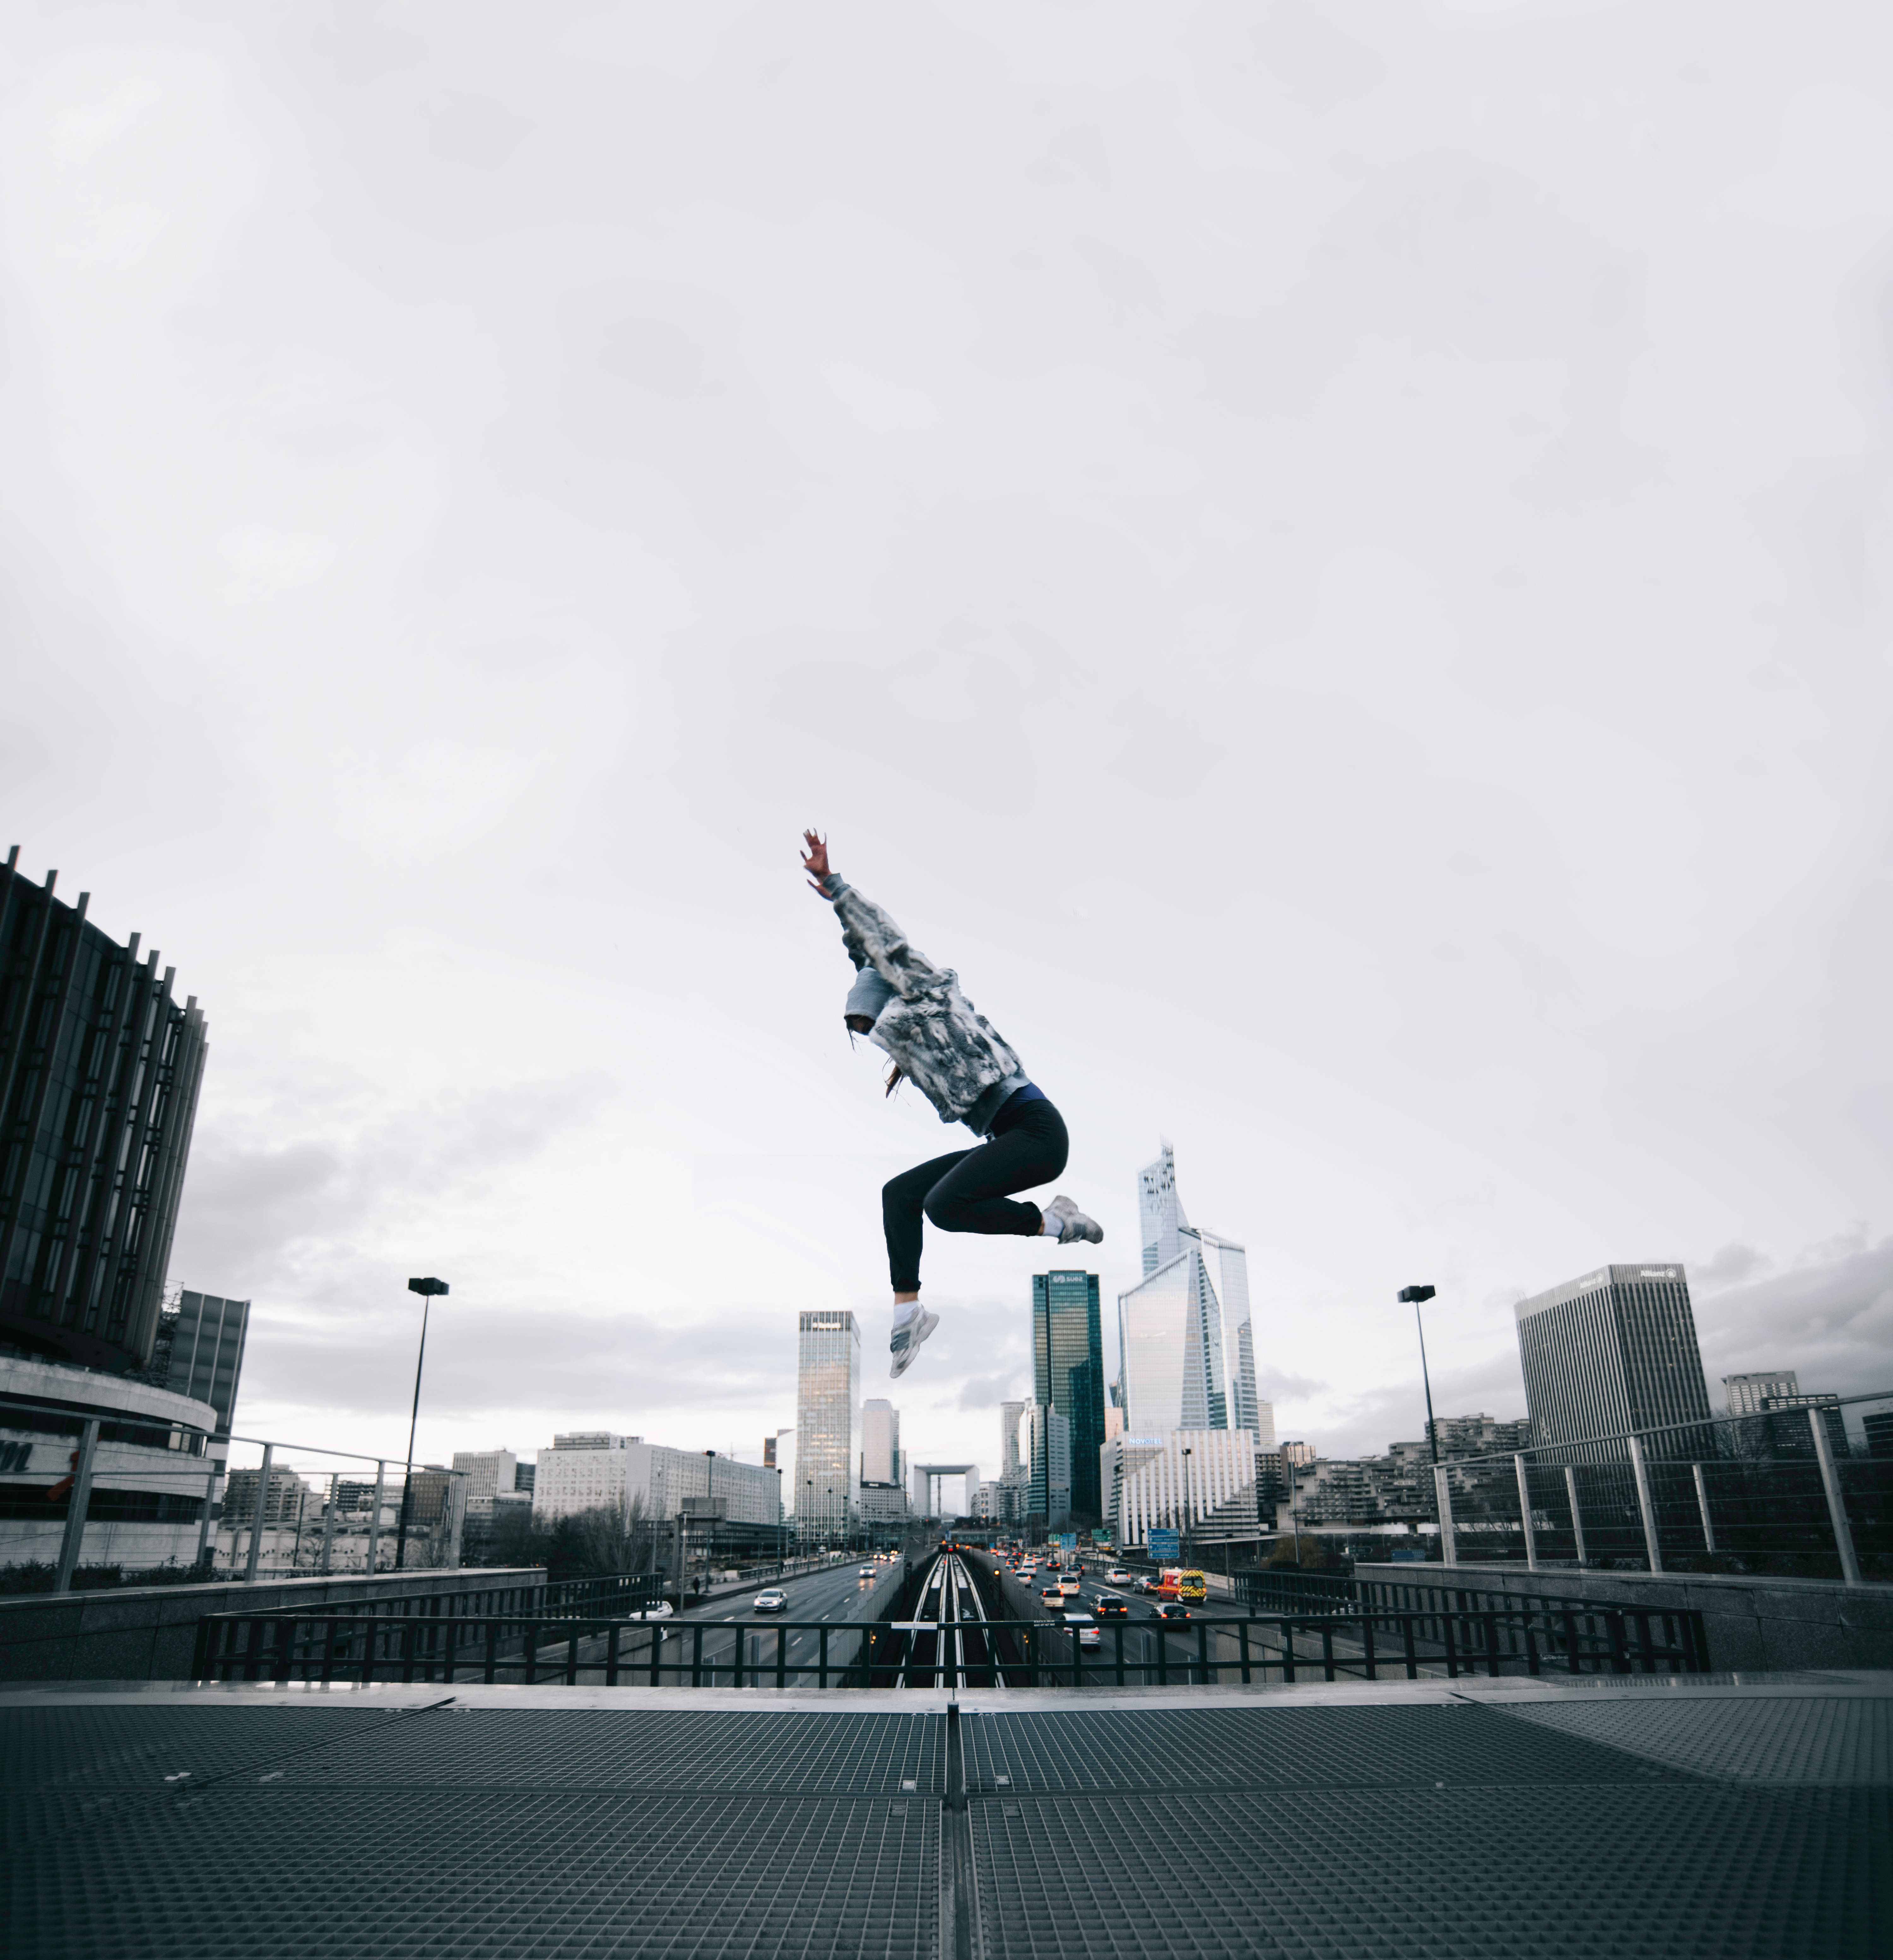 Download Midair Parkour In City Wallpaper Wallpapers Com